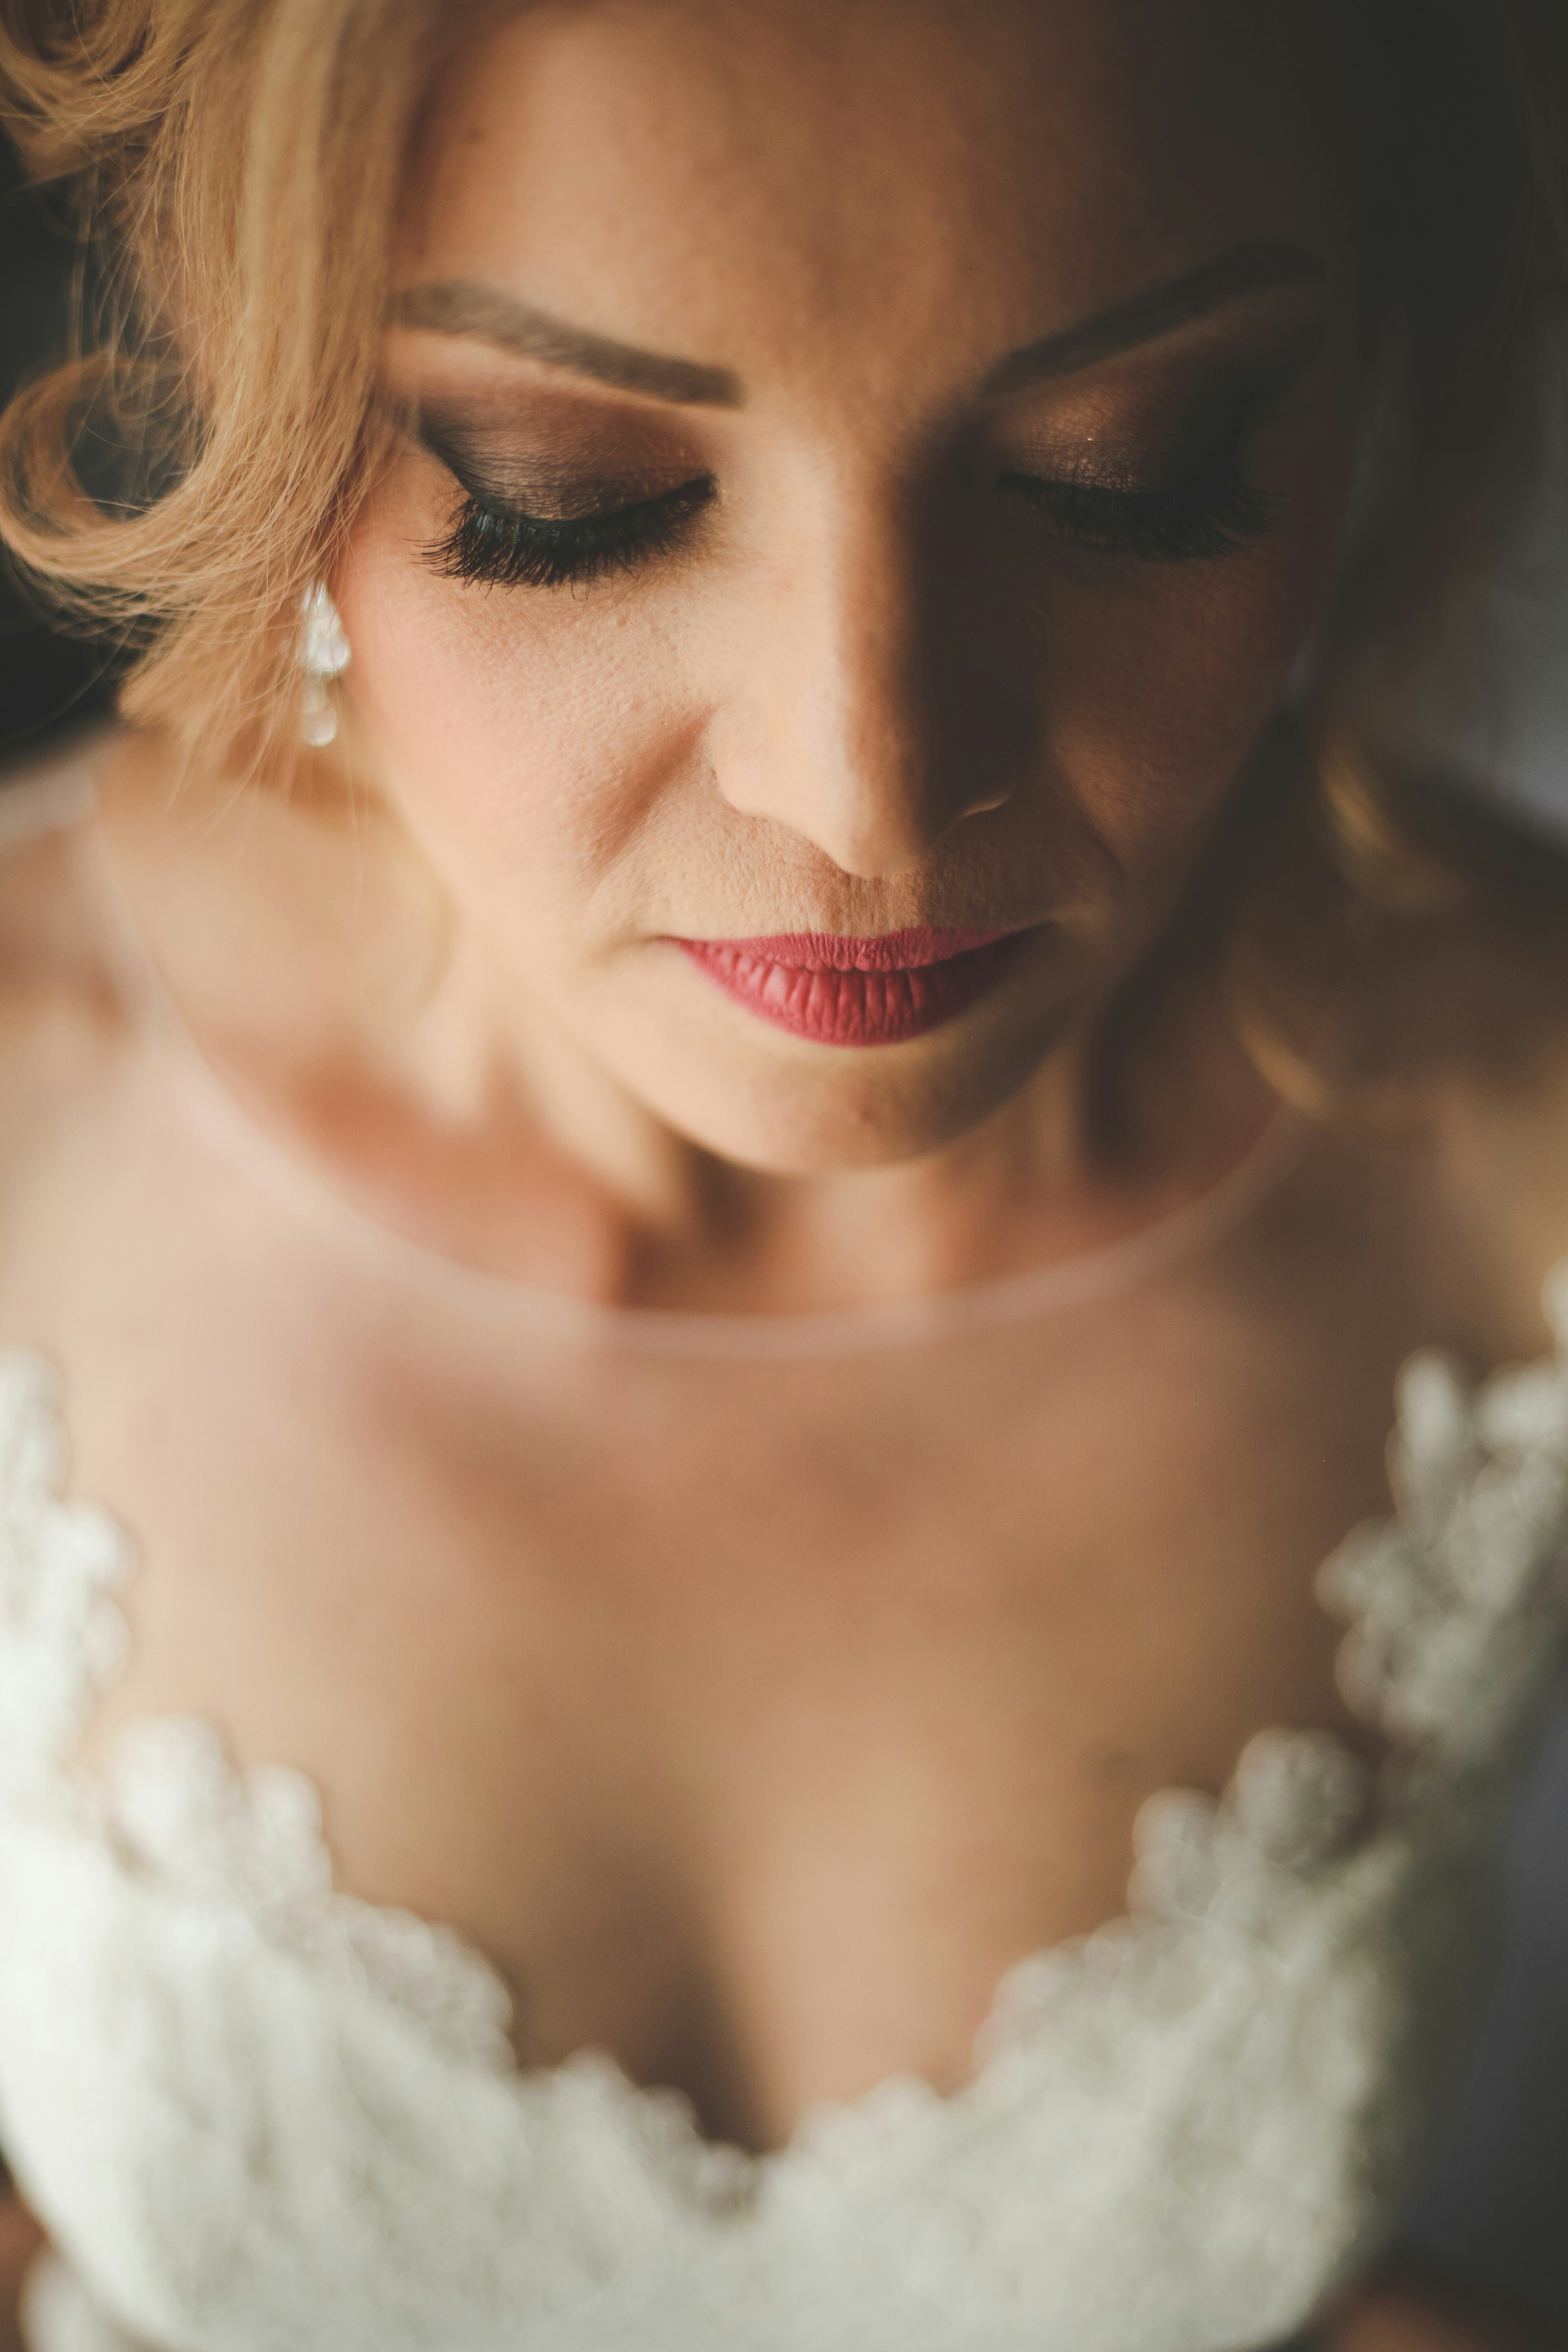 A serious-looking bride | Source: Unsplash